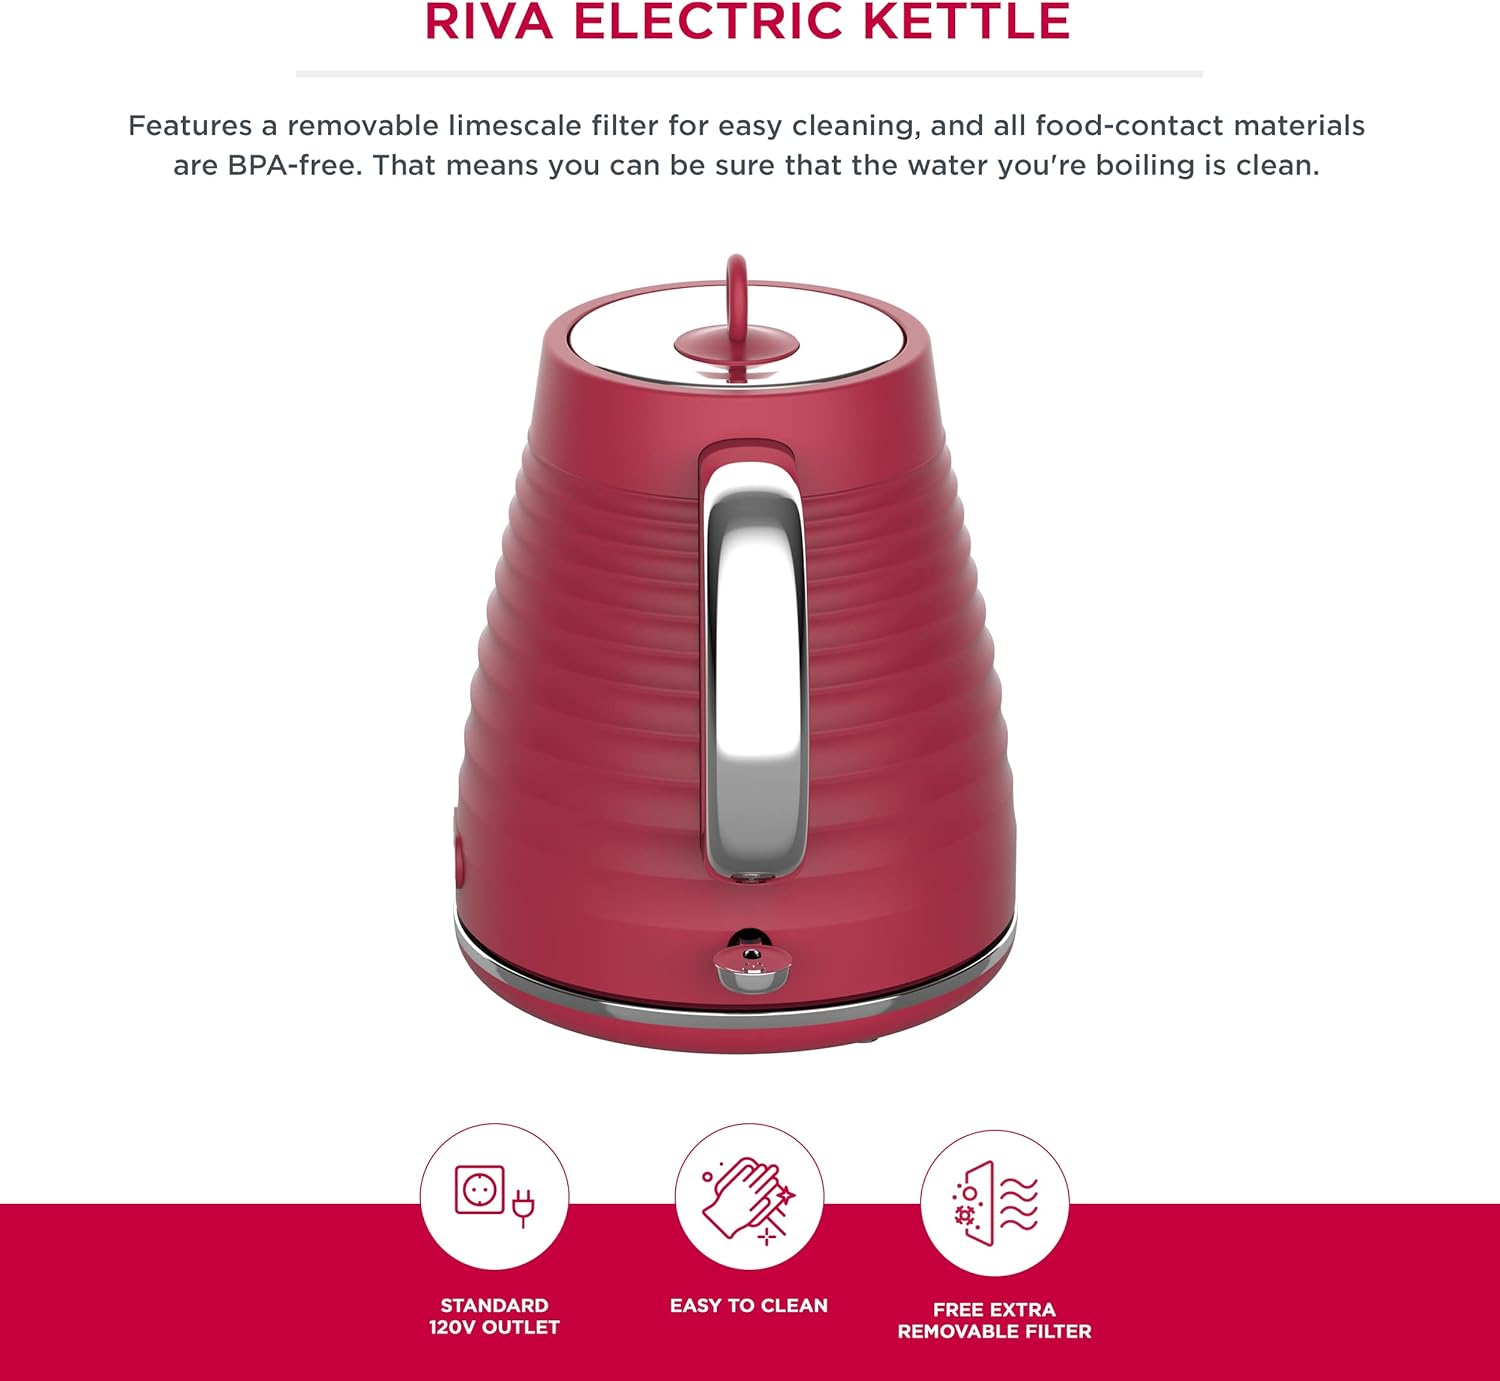 Homeart Riva Electric Kettle - With Removable Limescale Filter, Fast Boiling and Auto Shut-off, Ergonomic Handle and 360-Degree Base - 1.7L Capacity, Red